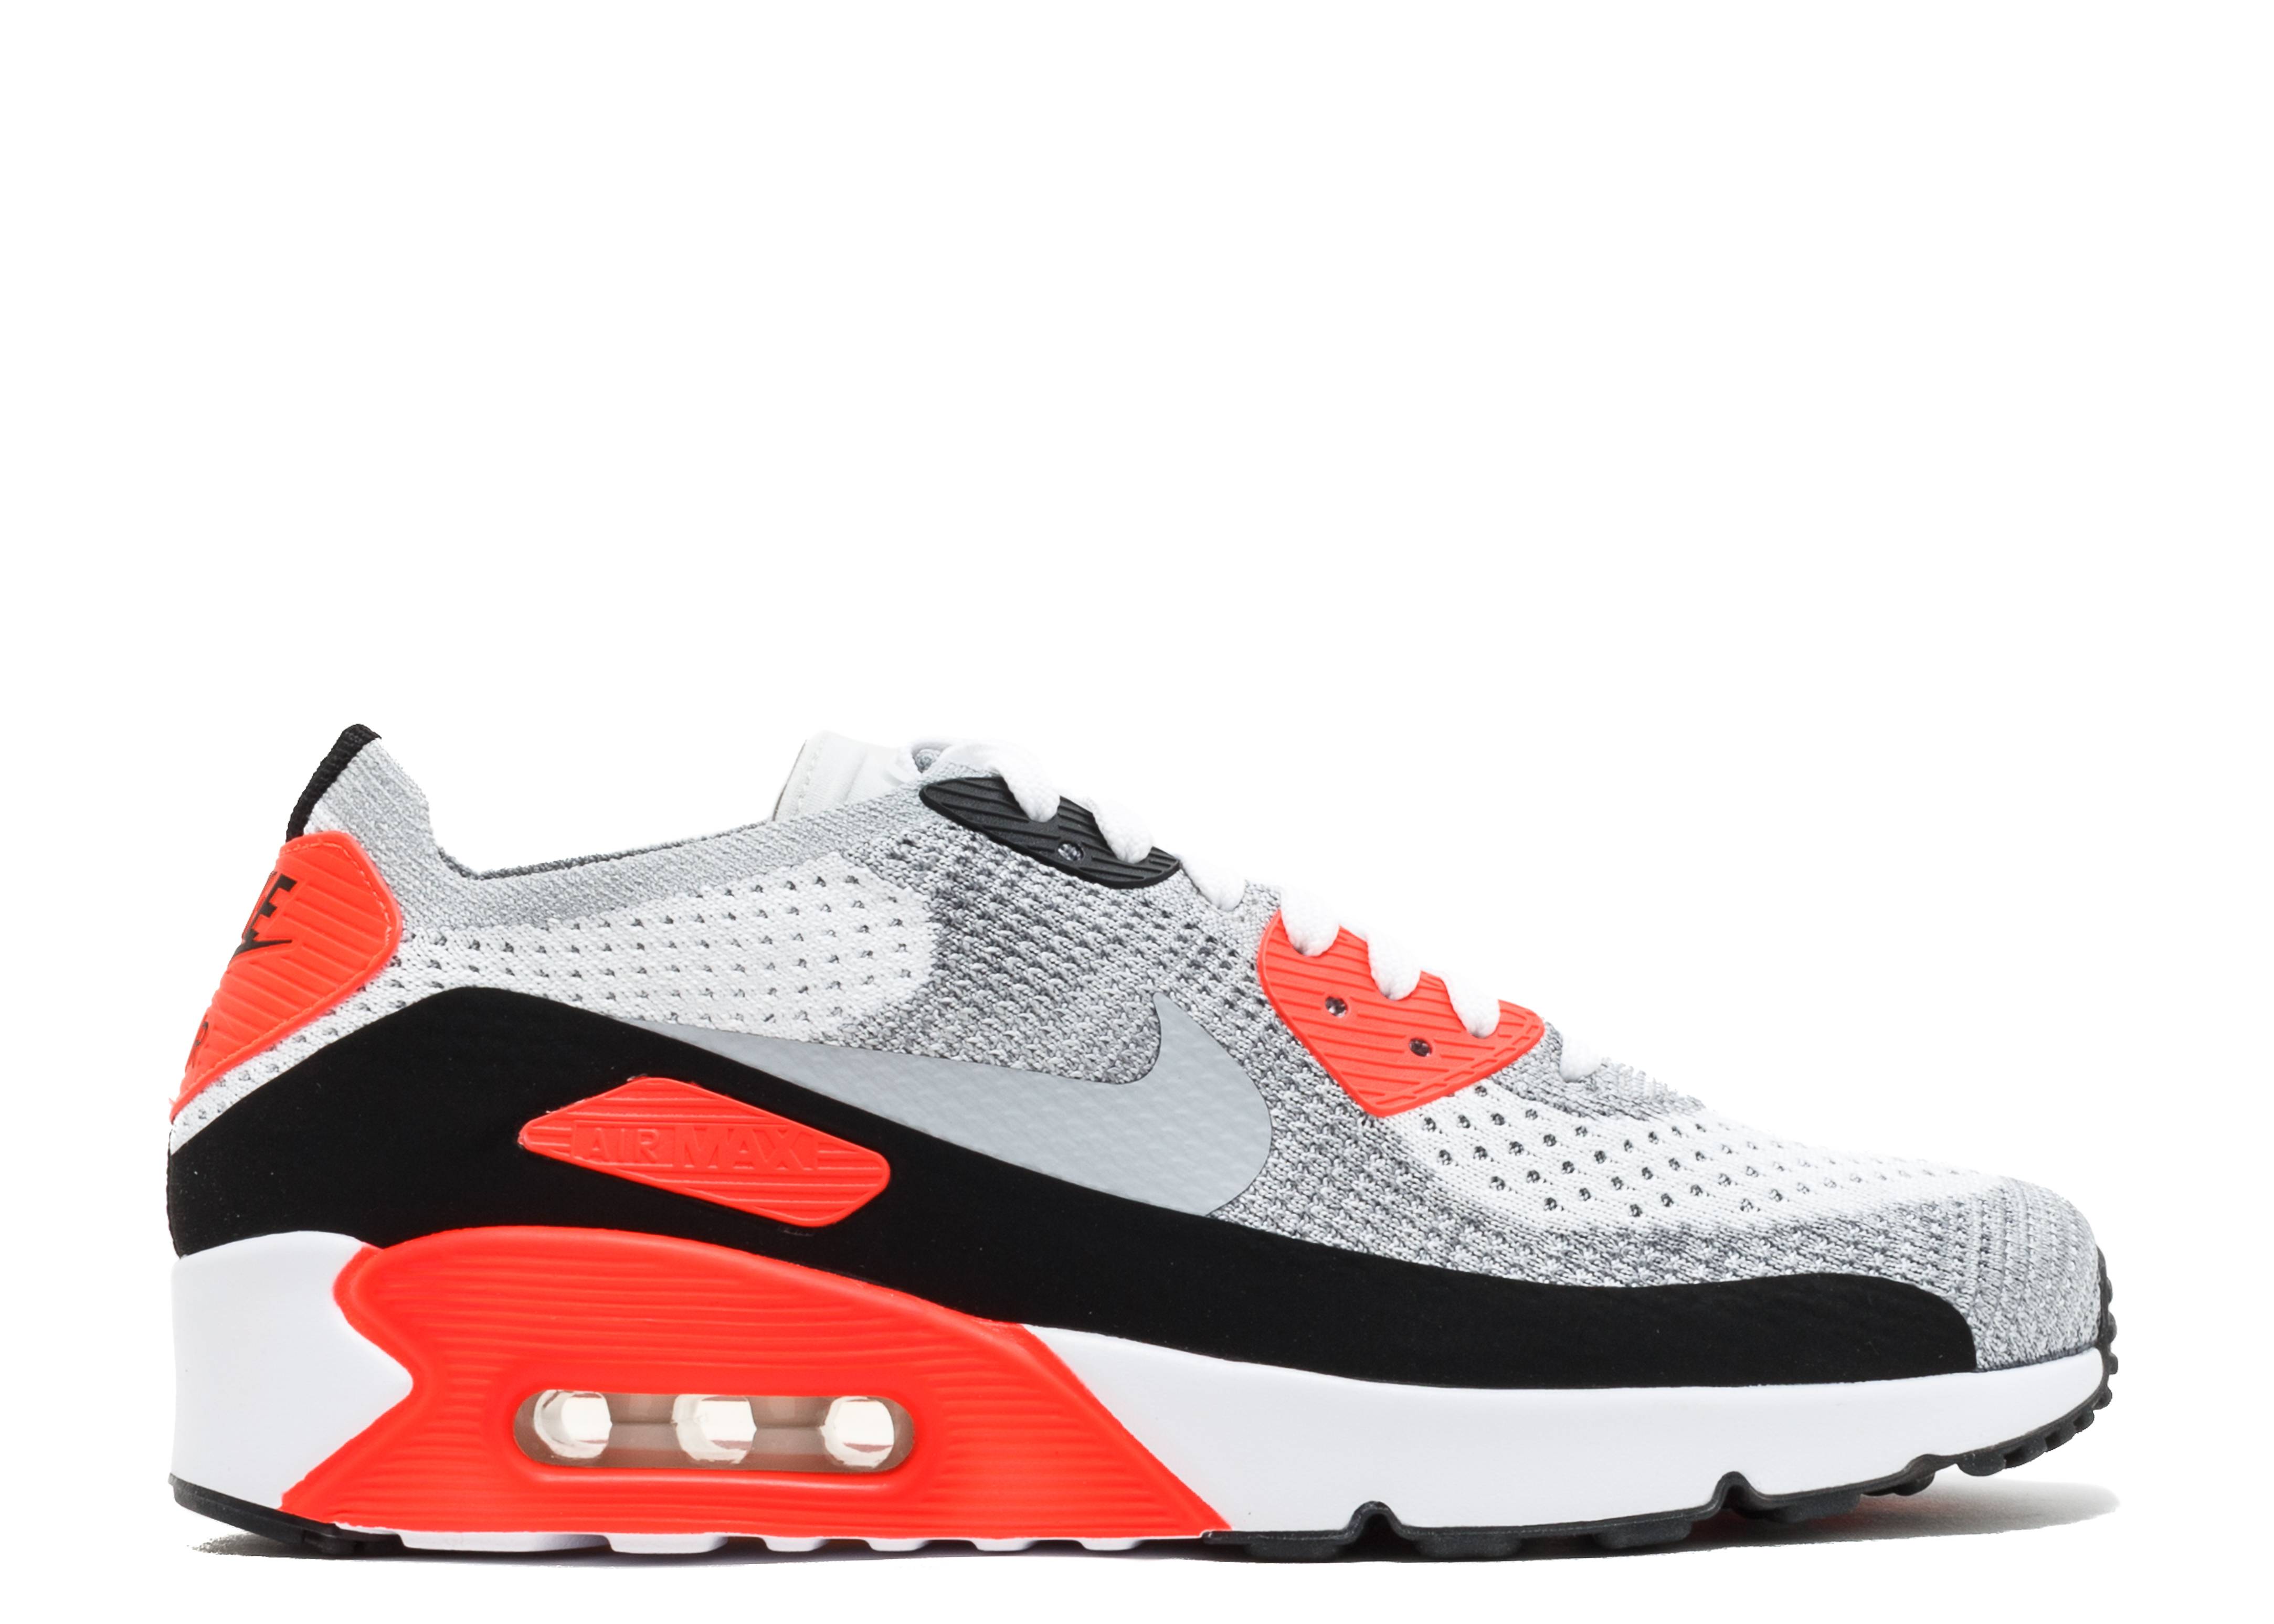 Air Max 90 Ultra 2.0 Flyknit 'Infrared'